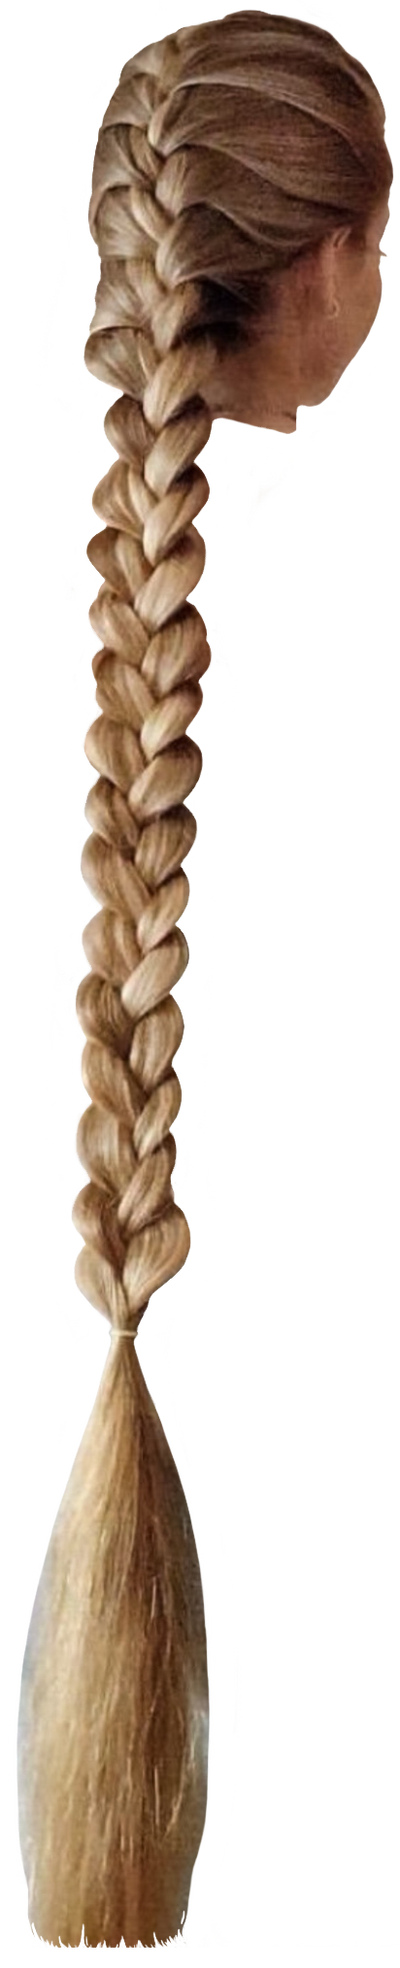 Braiding Background PNG